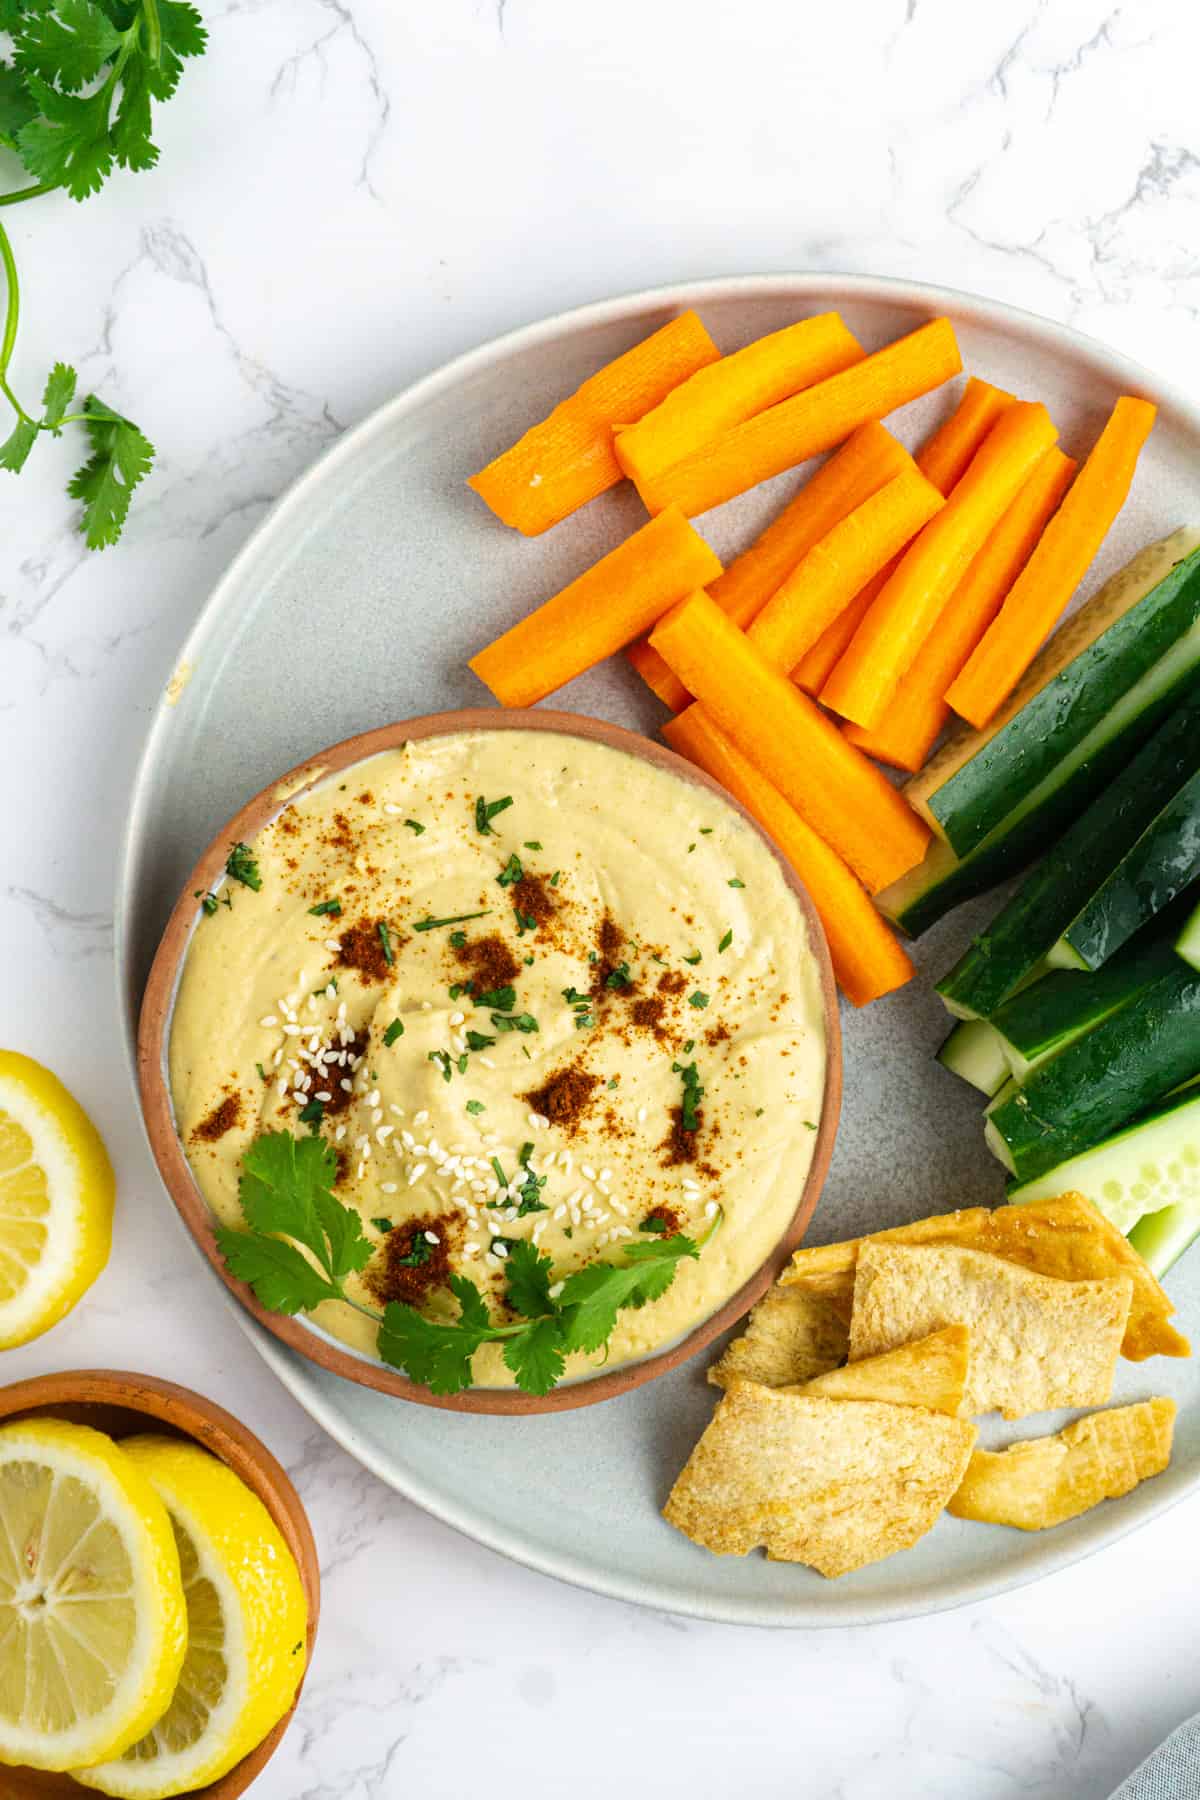 A plate of hummus with raw veggies and pita chips.